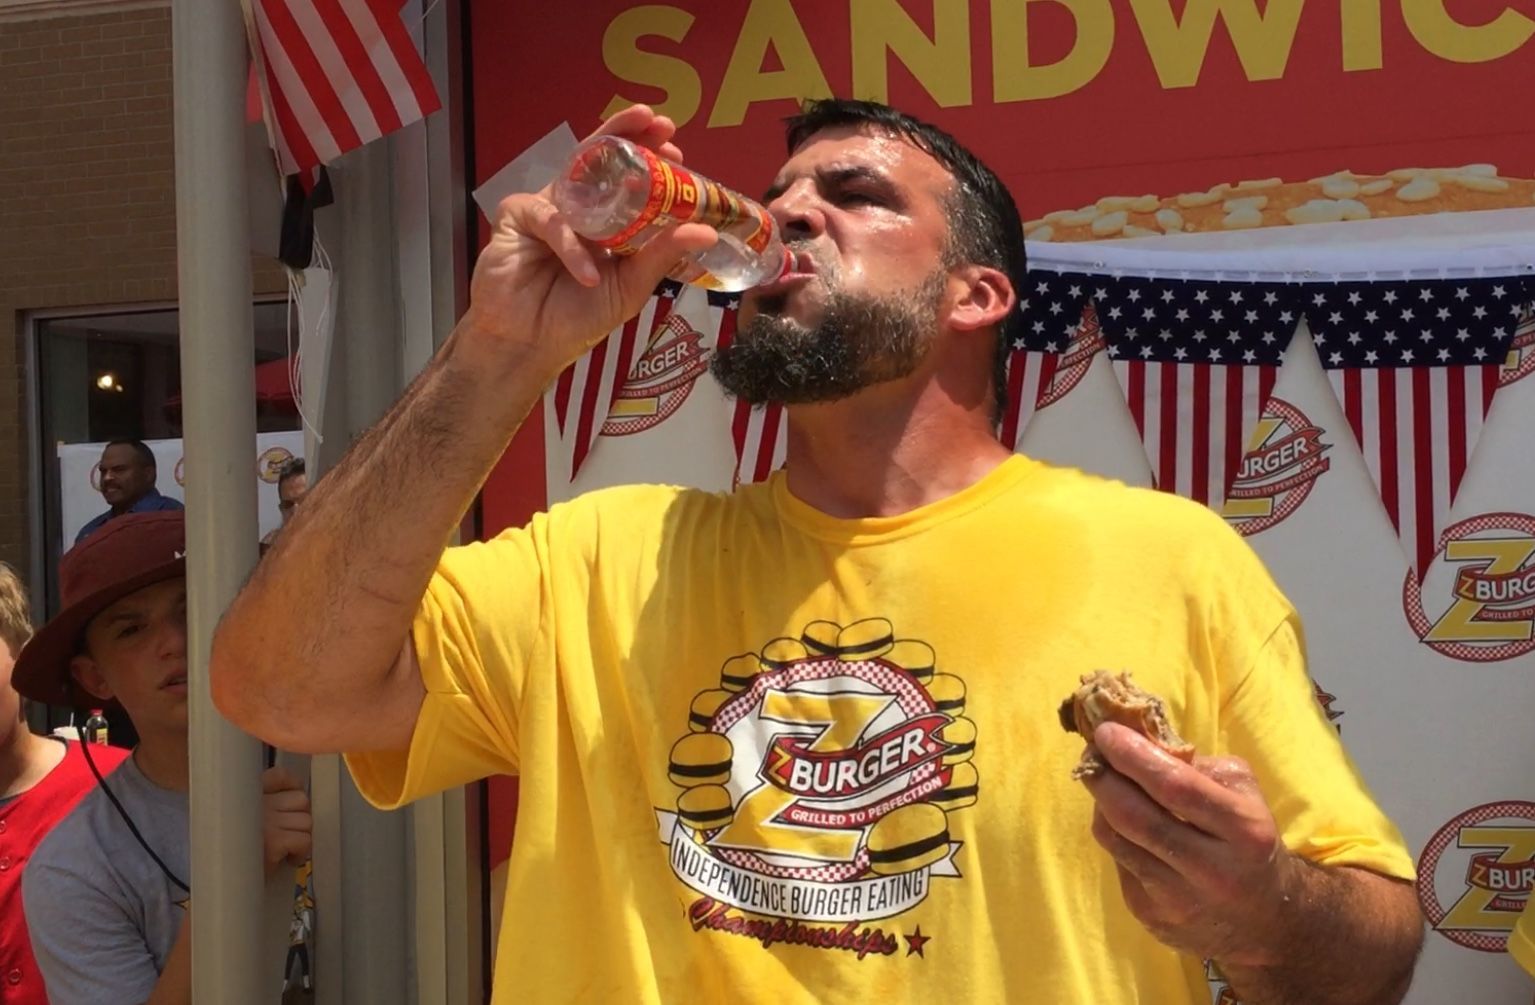 During the contest, temperatures were well into the 90s with a heat index pushing 110 degrees. And competitors like David "Tiger Wings and Things" Brunelli were certainly feeling it. (WTOP/Kristi King)